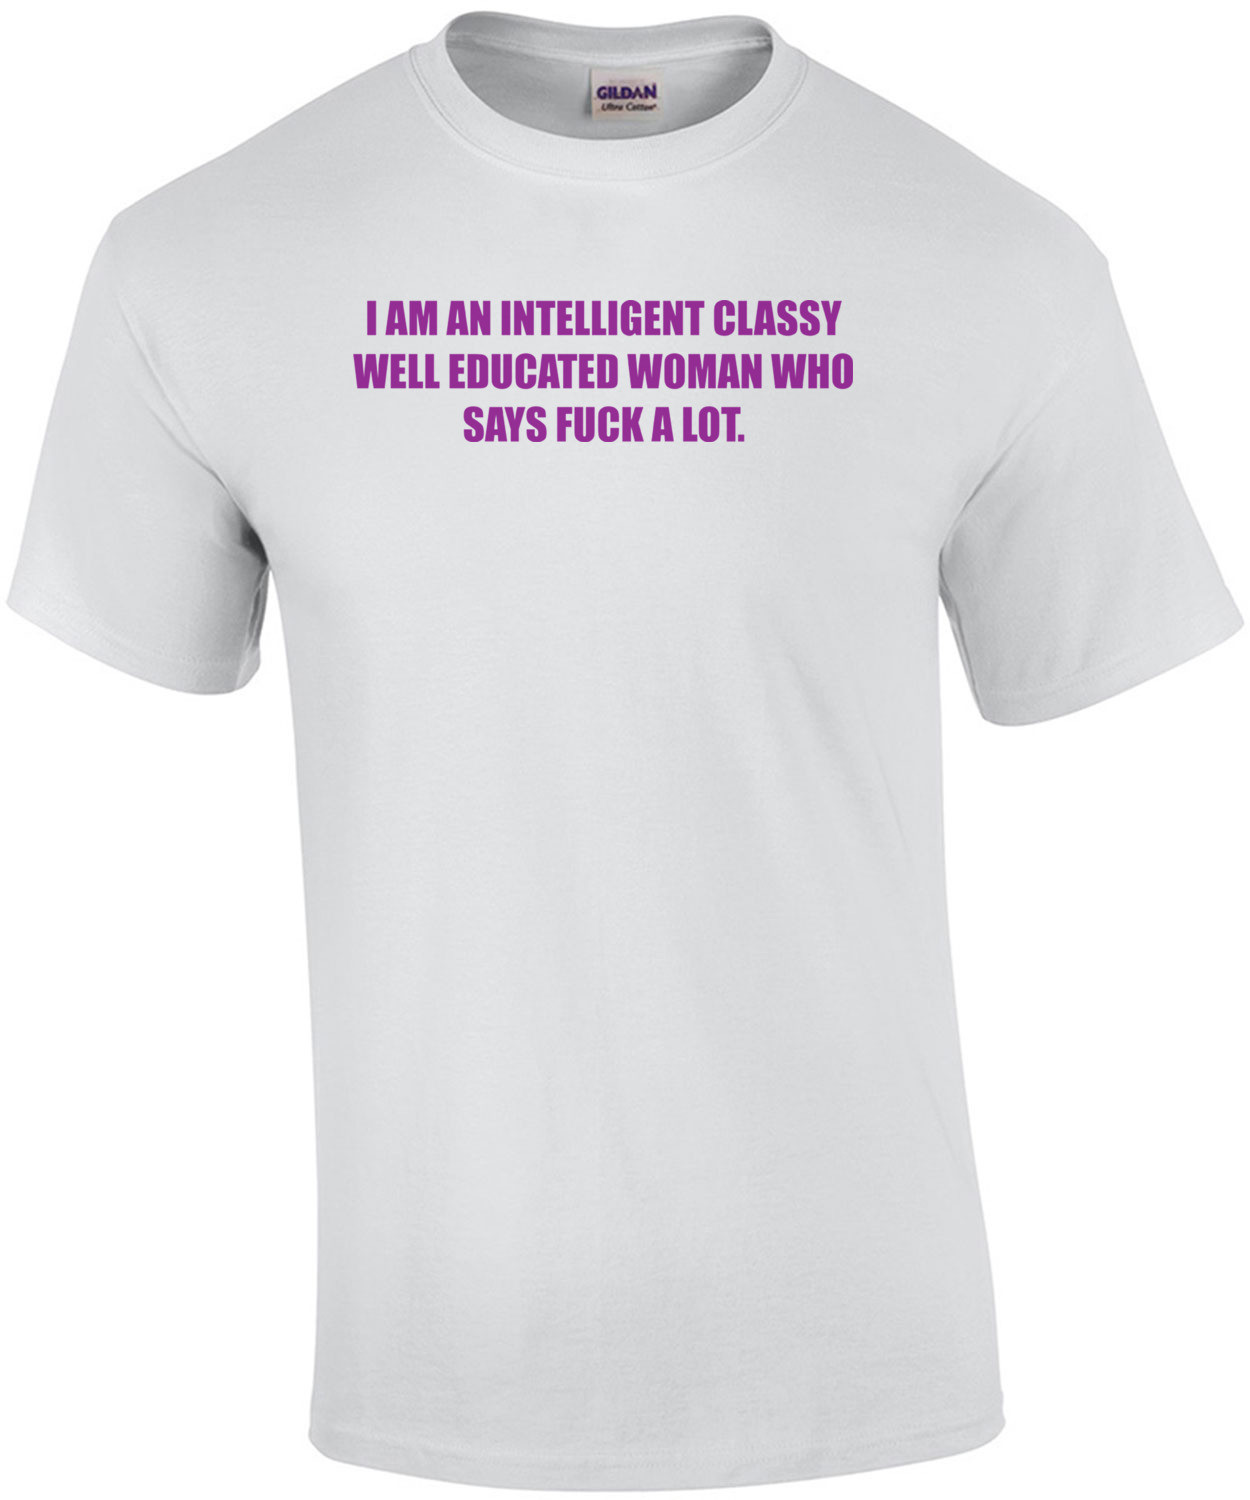 I Am An Intelligent Classy Well Educated Woman Who Says Fuck A Lot. Shirt